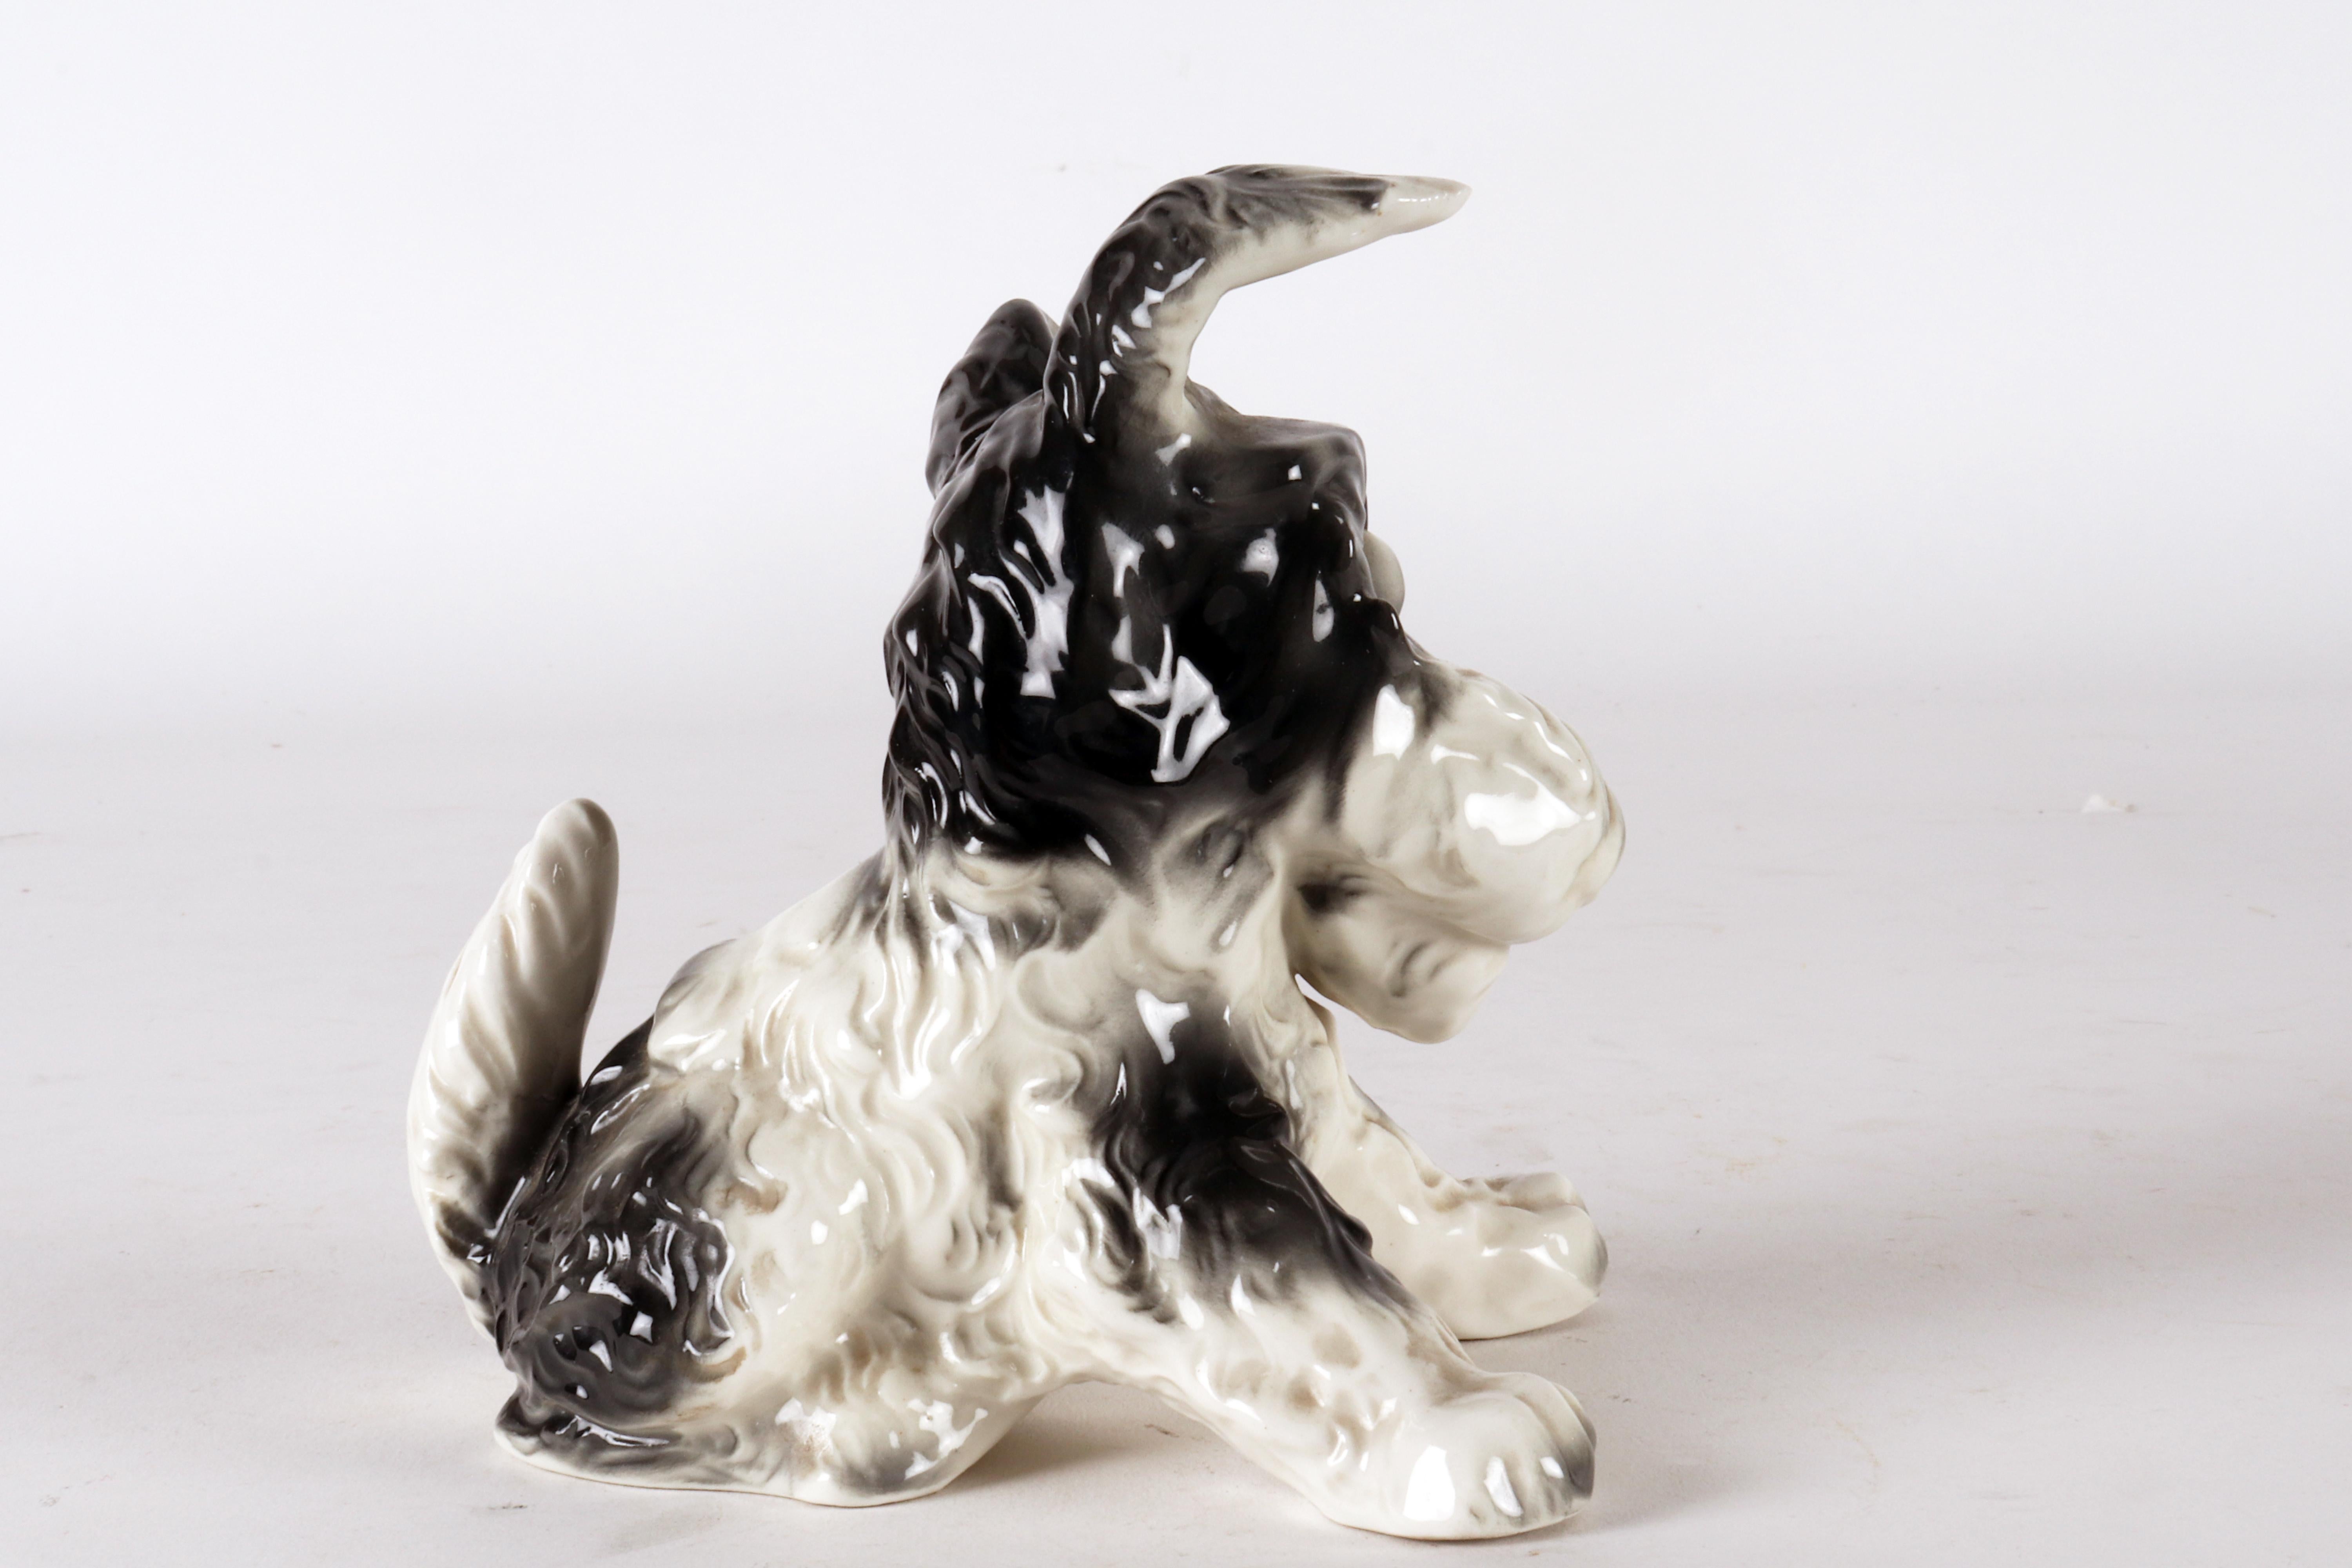 Porcelain sculpture of a Terrier dog, England Thuringia, Germany, 1940 - 1950. For Sale 1